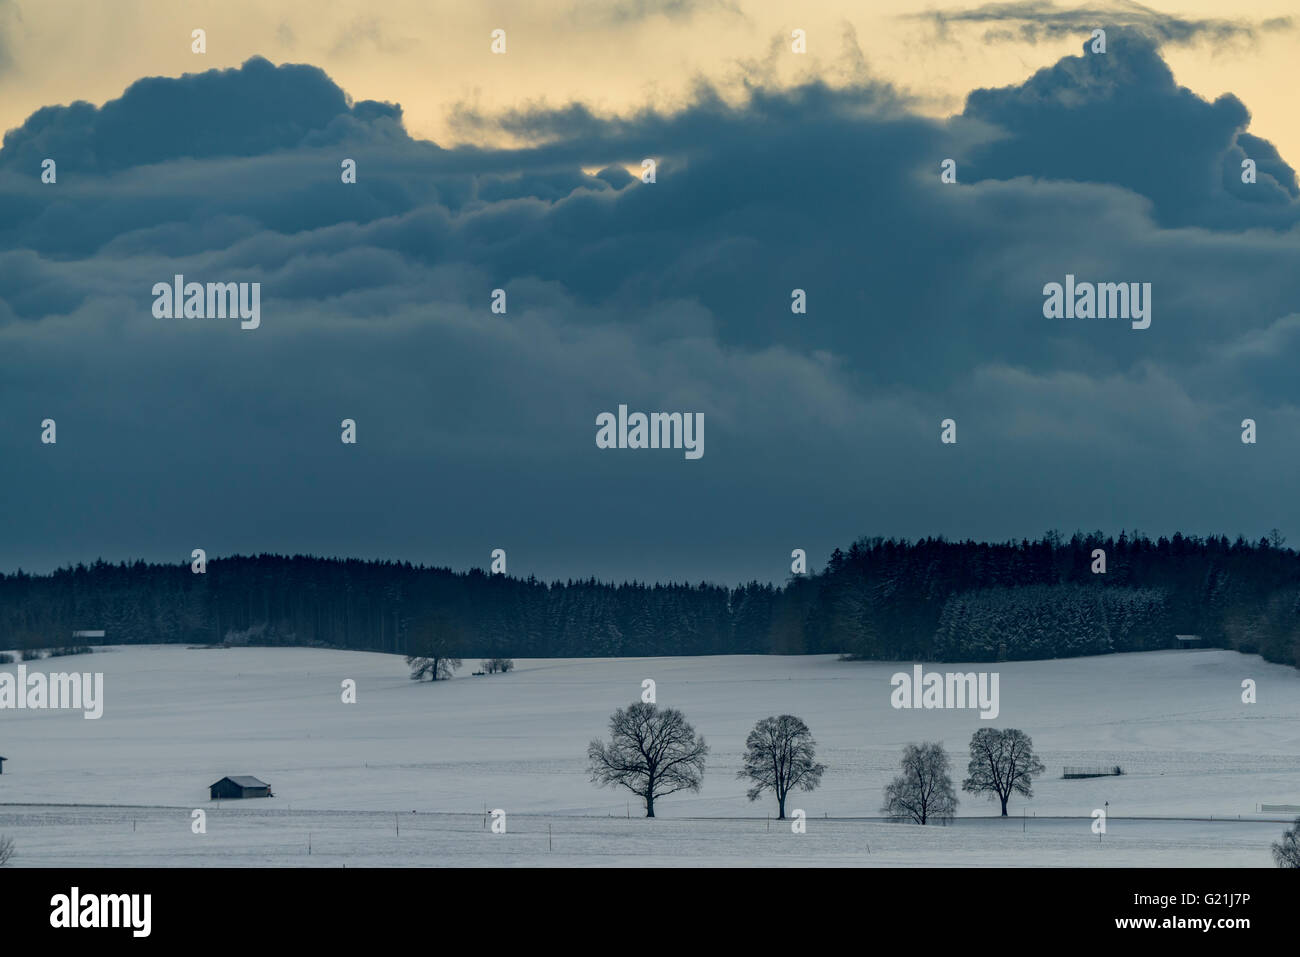 Trees in wintry landscape with dramatic sky, Stetten, Unterallgäu District, Bavaria, Germany Stock Photo